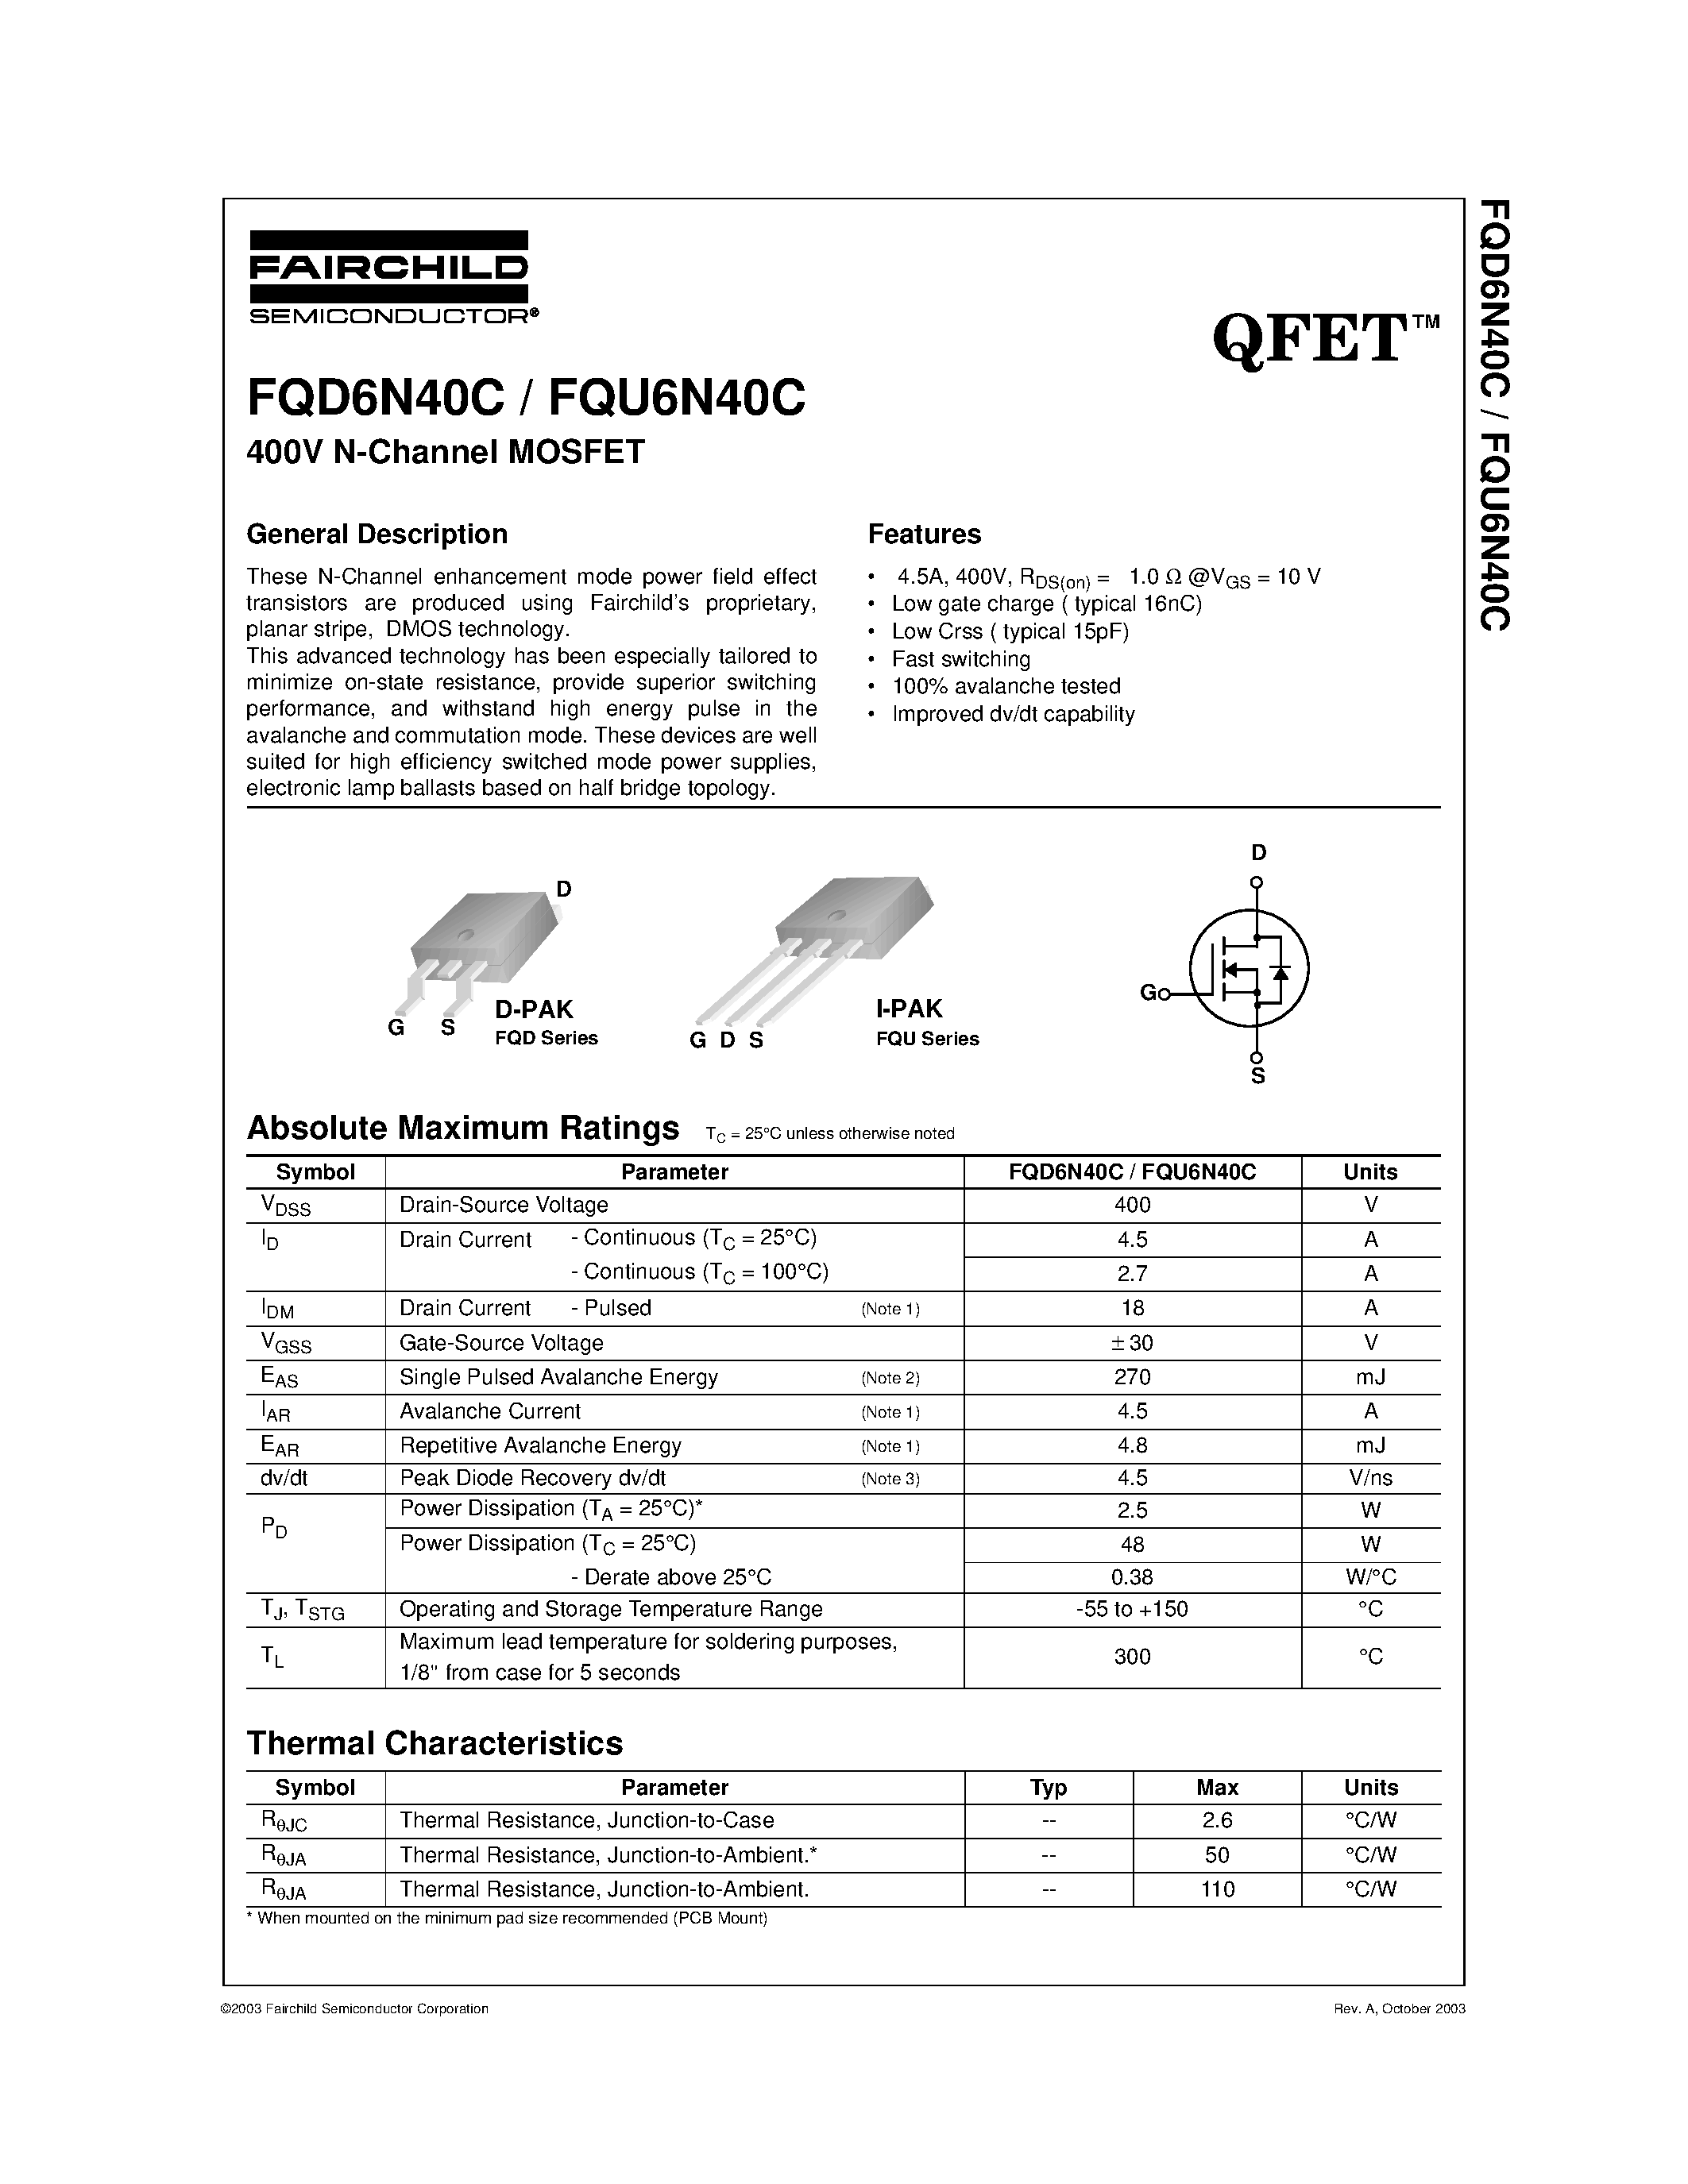 Datasheet FQD6N40C - 400V N-Channel MOSFET page 1